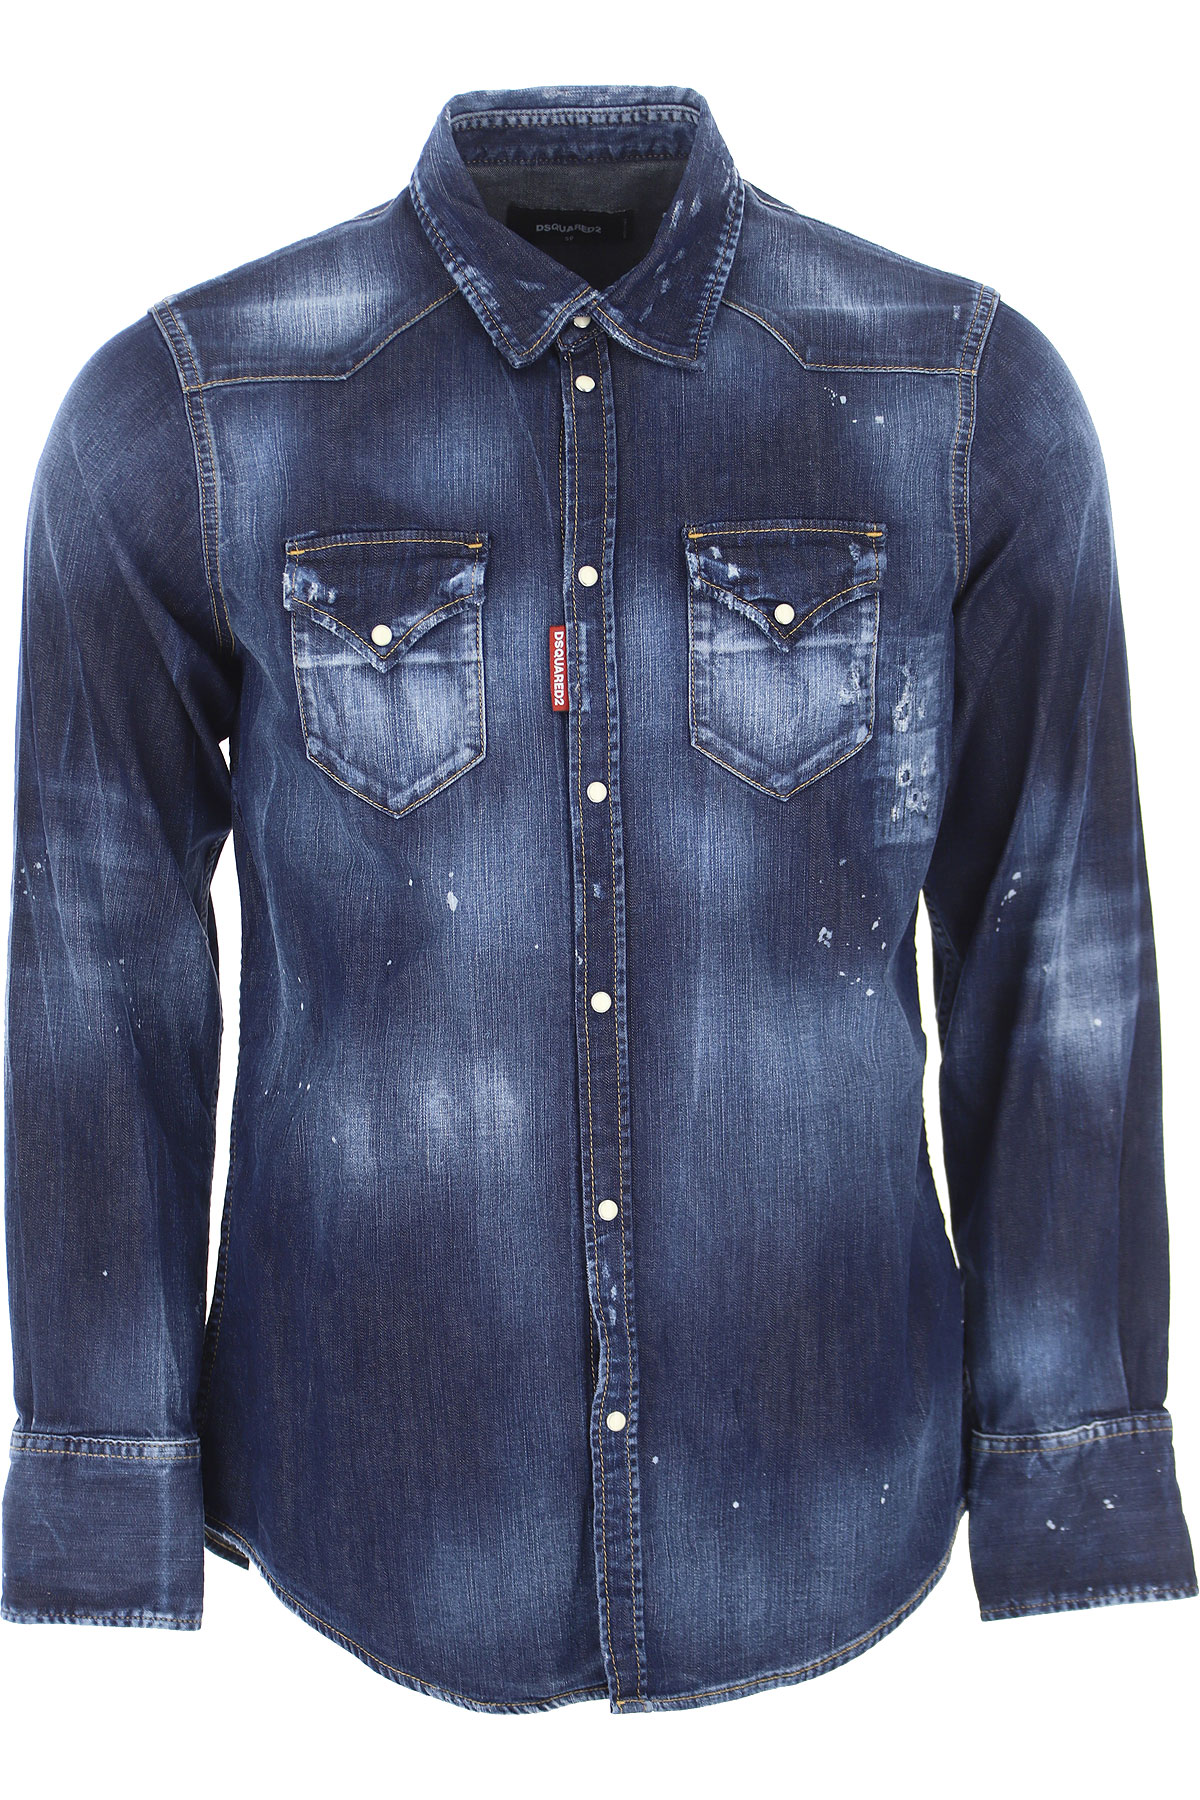 Mens Clothing Dsquared2, Style code: dm0526-s30341-470